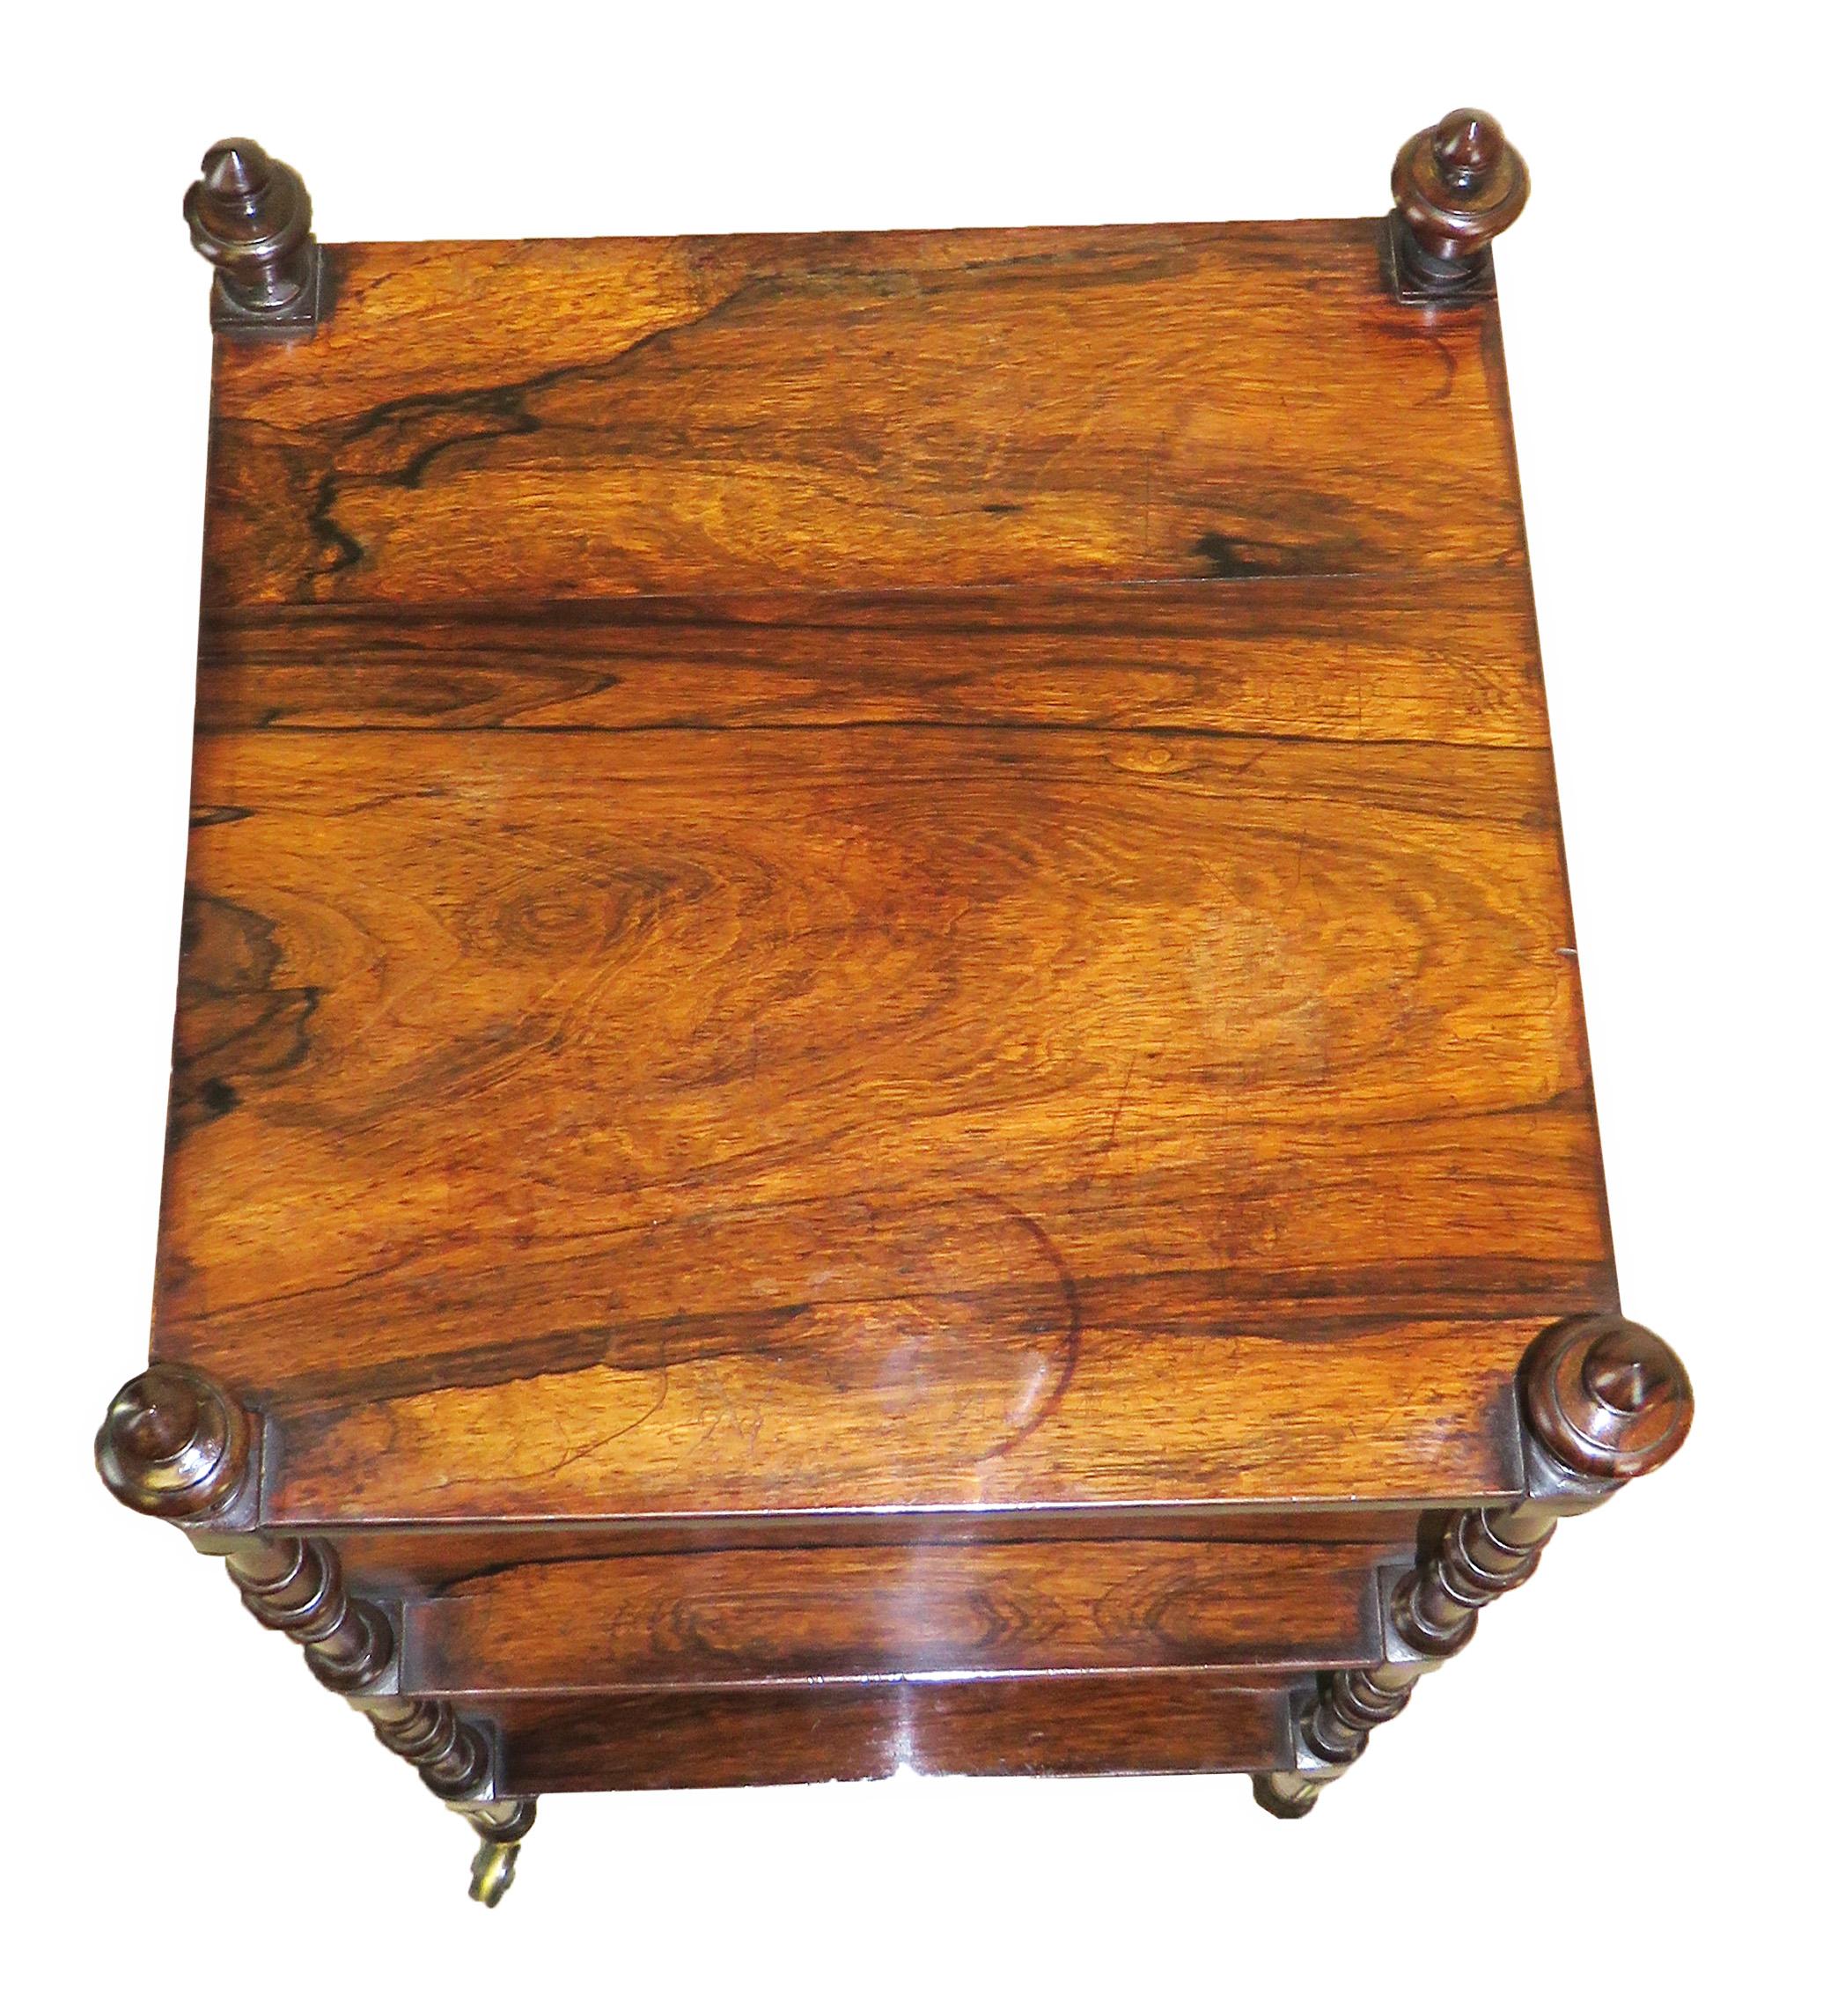 A fine quality English regency period rosewood
Whatnot, or etage, having three well figured
Tiers united by elegant turned upright supports
With acorn finials and turned legs with
Original brass castors

(Many different forms of these